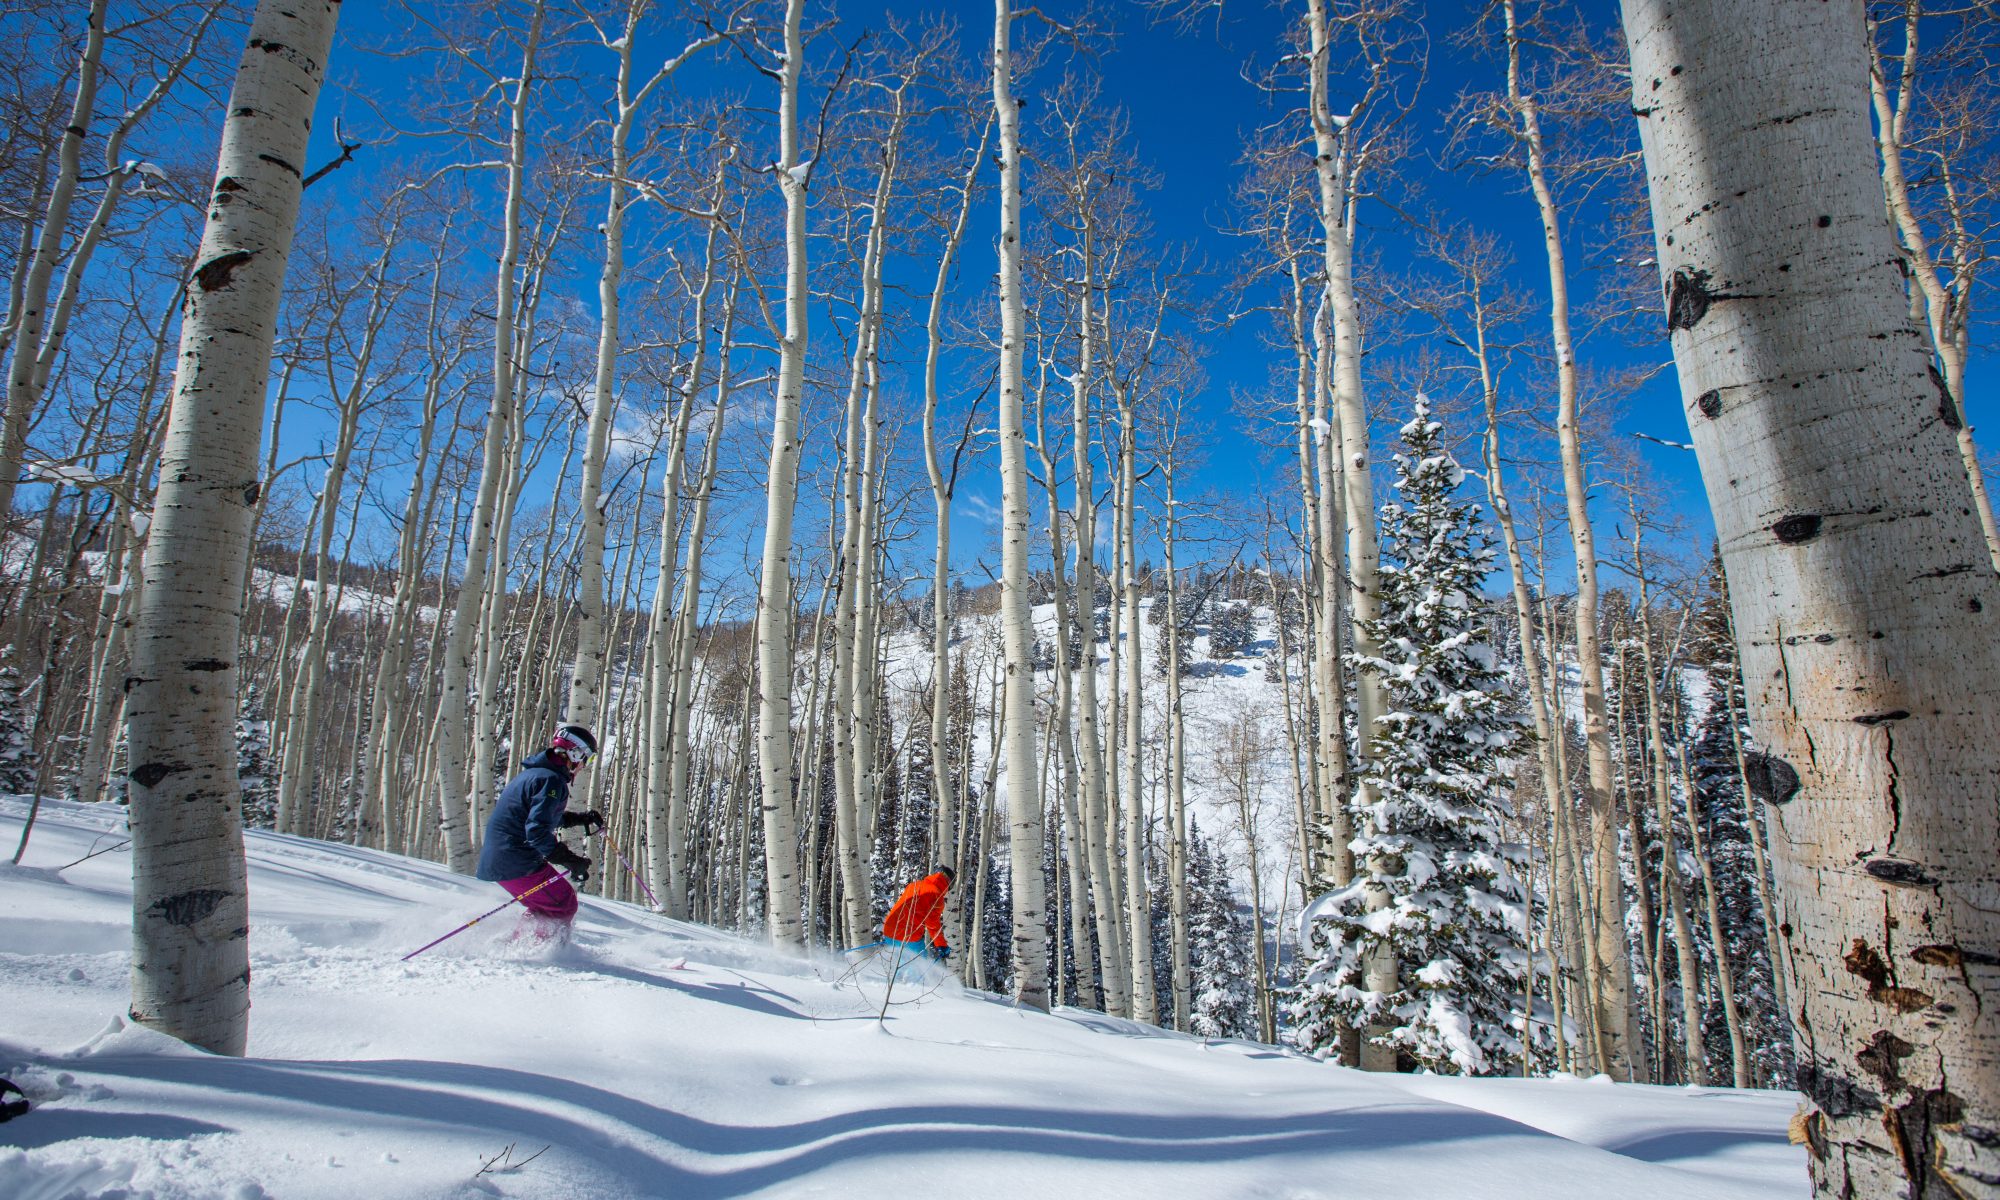 Skiing through the glades at Deer Valley Resort. Deer Valley who was awarded Best US Ski Resort by the World Ski Awards for the sixth year, opens this Saturday December 8th.